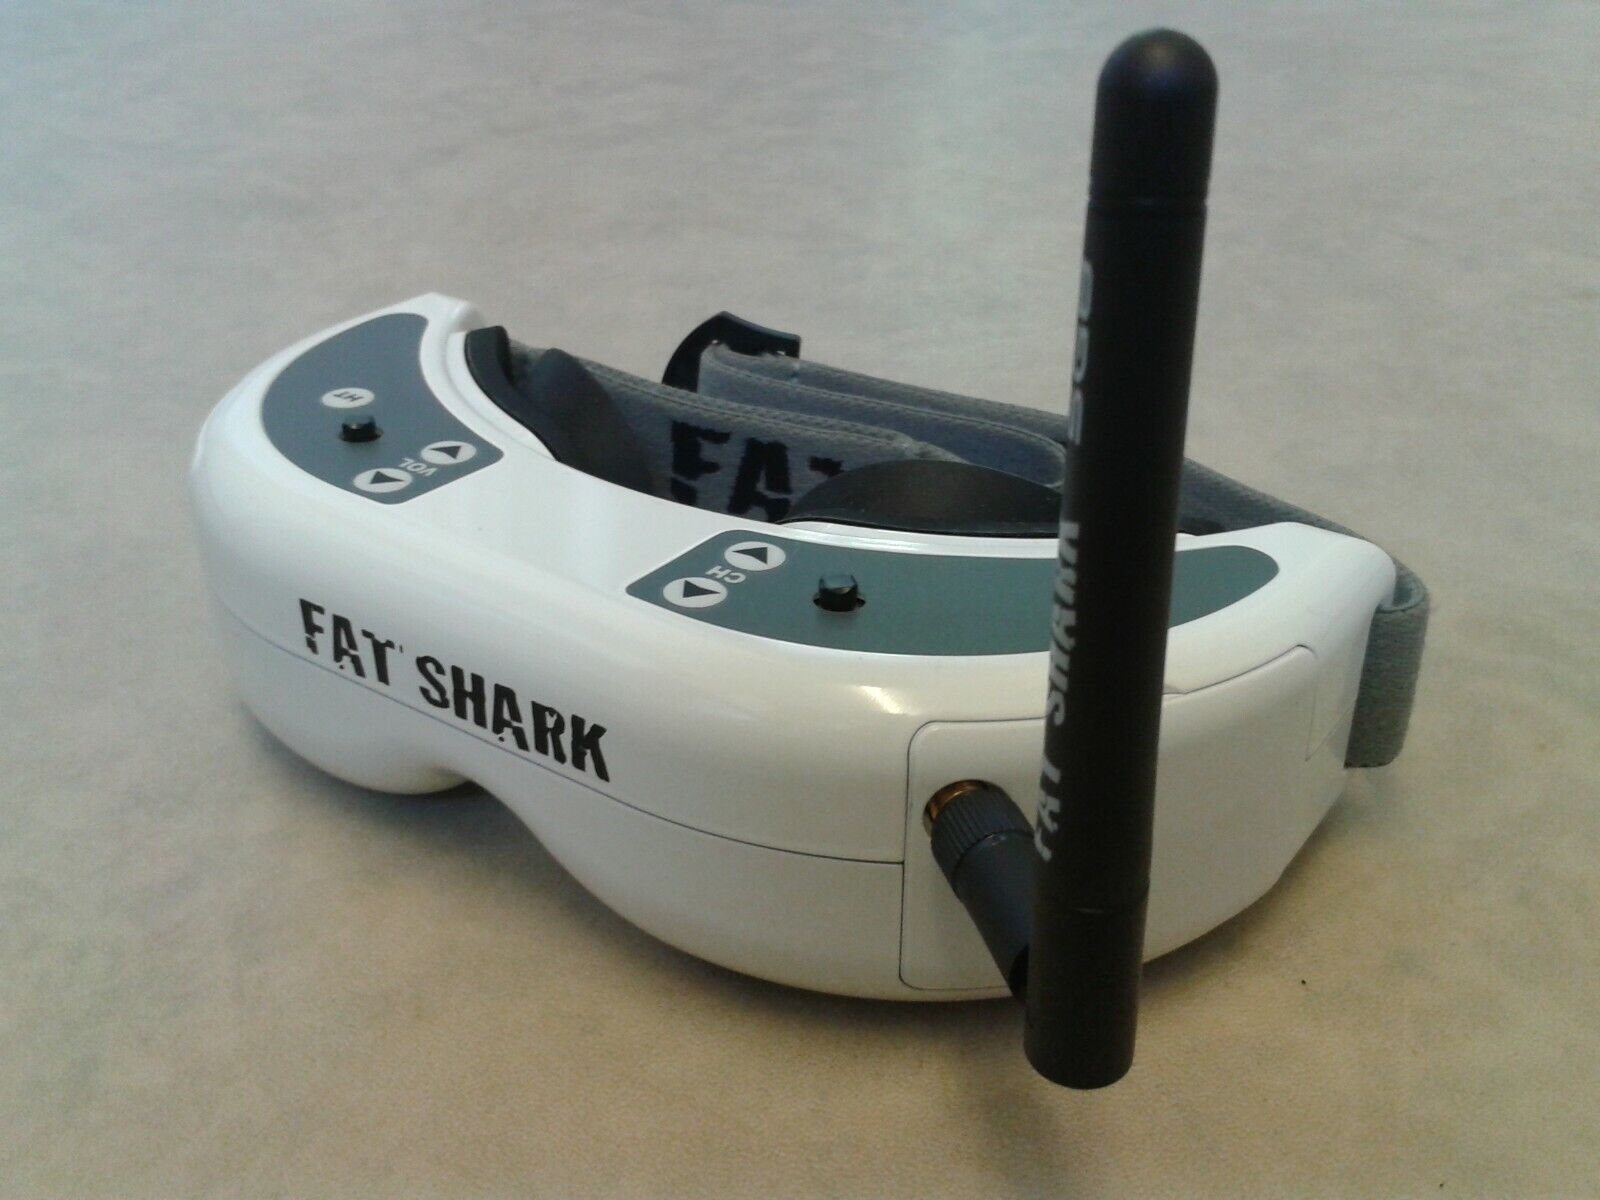 HD FPV Goggles with 5.8GHz Receiver